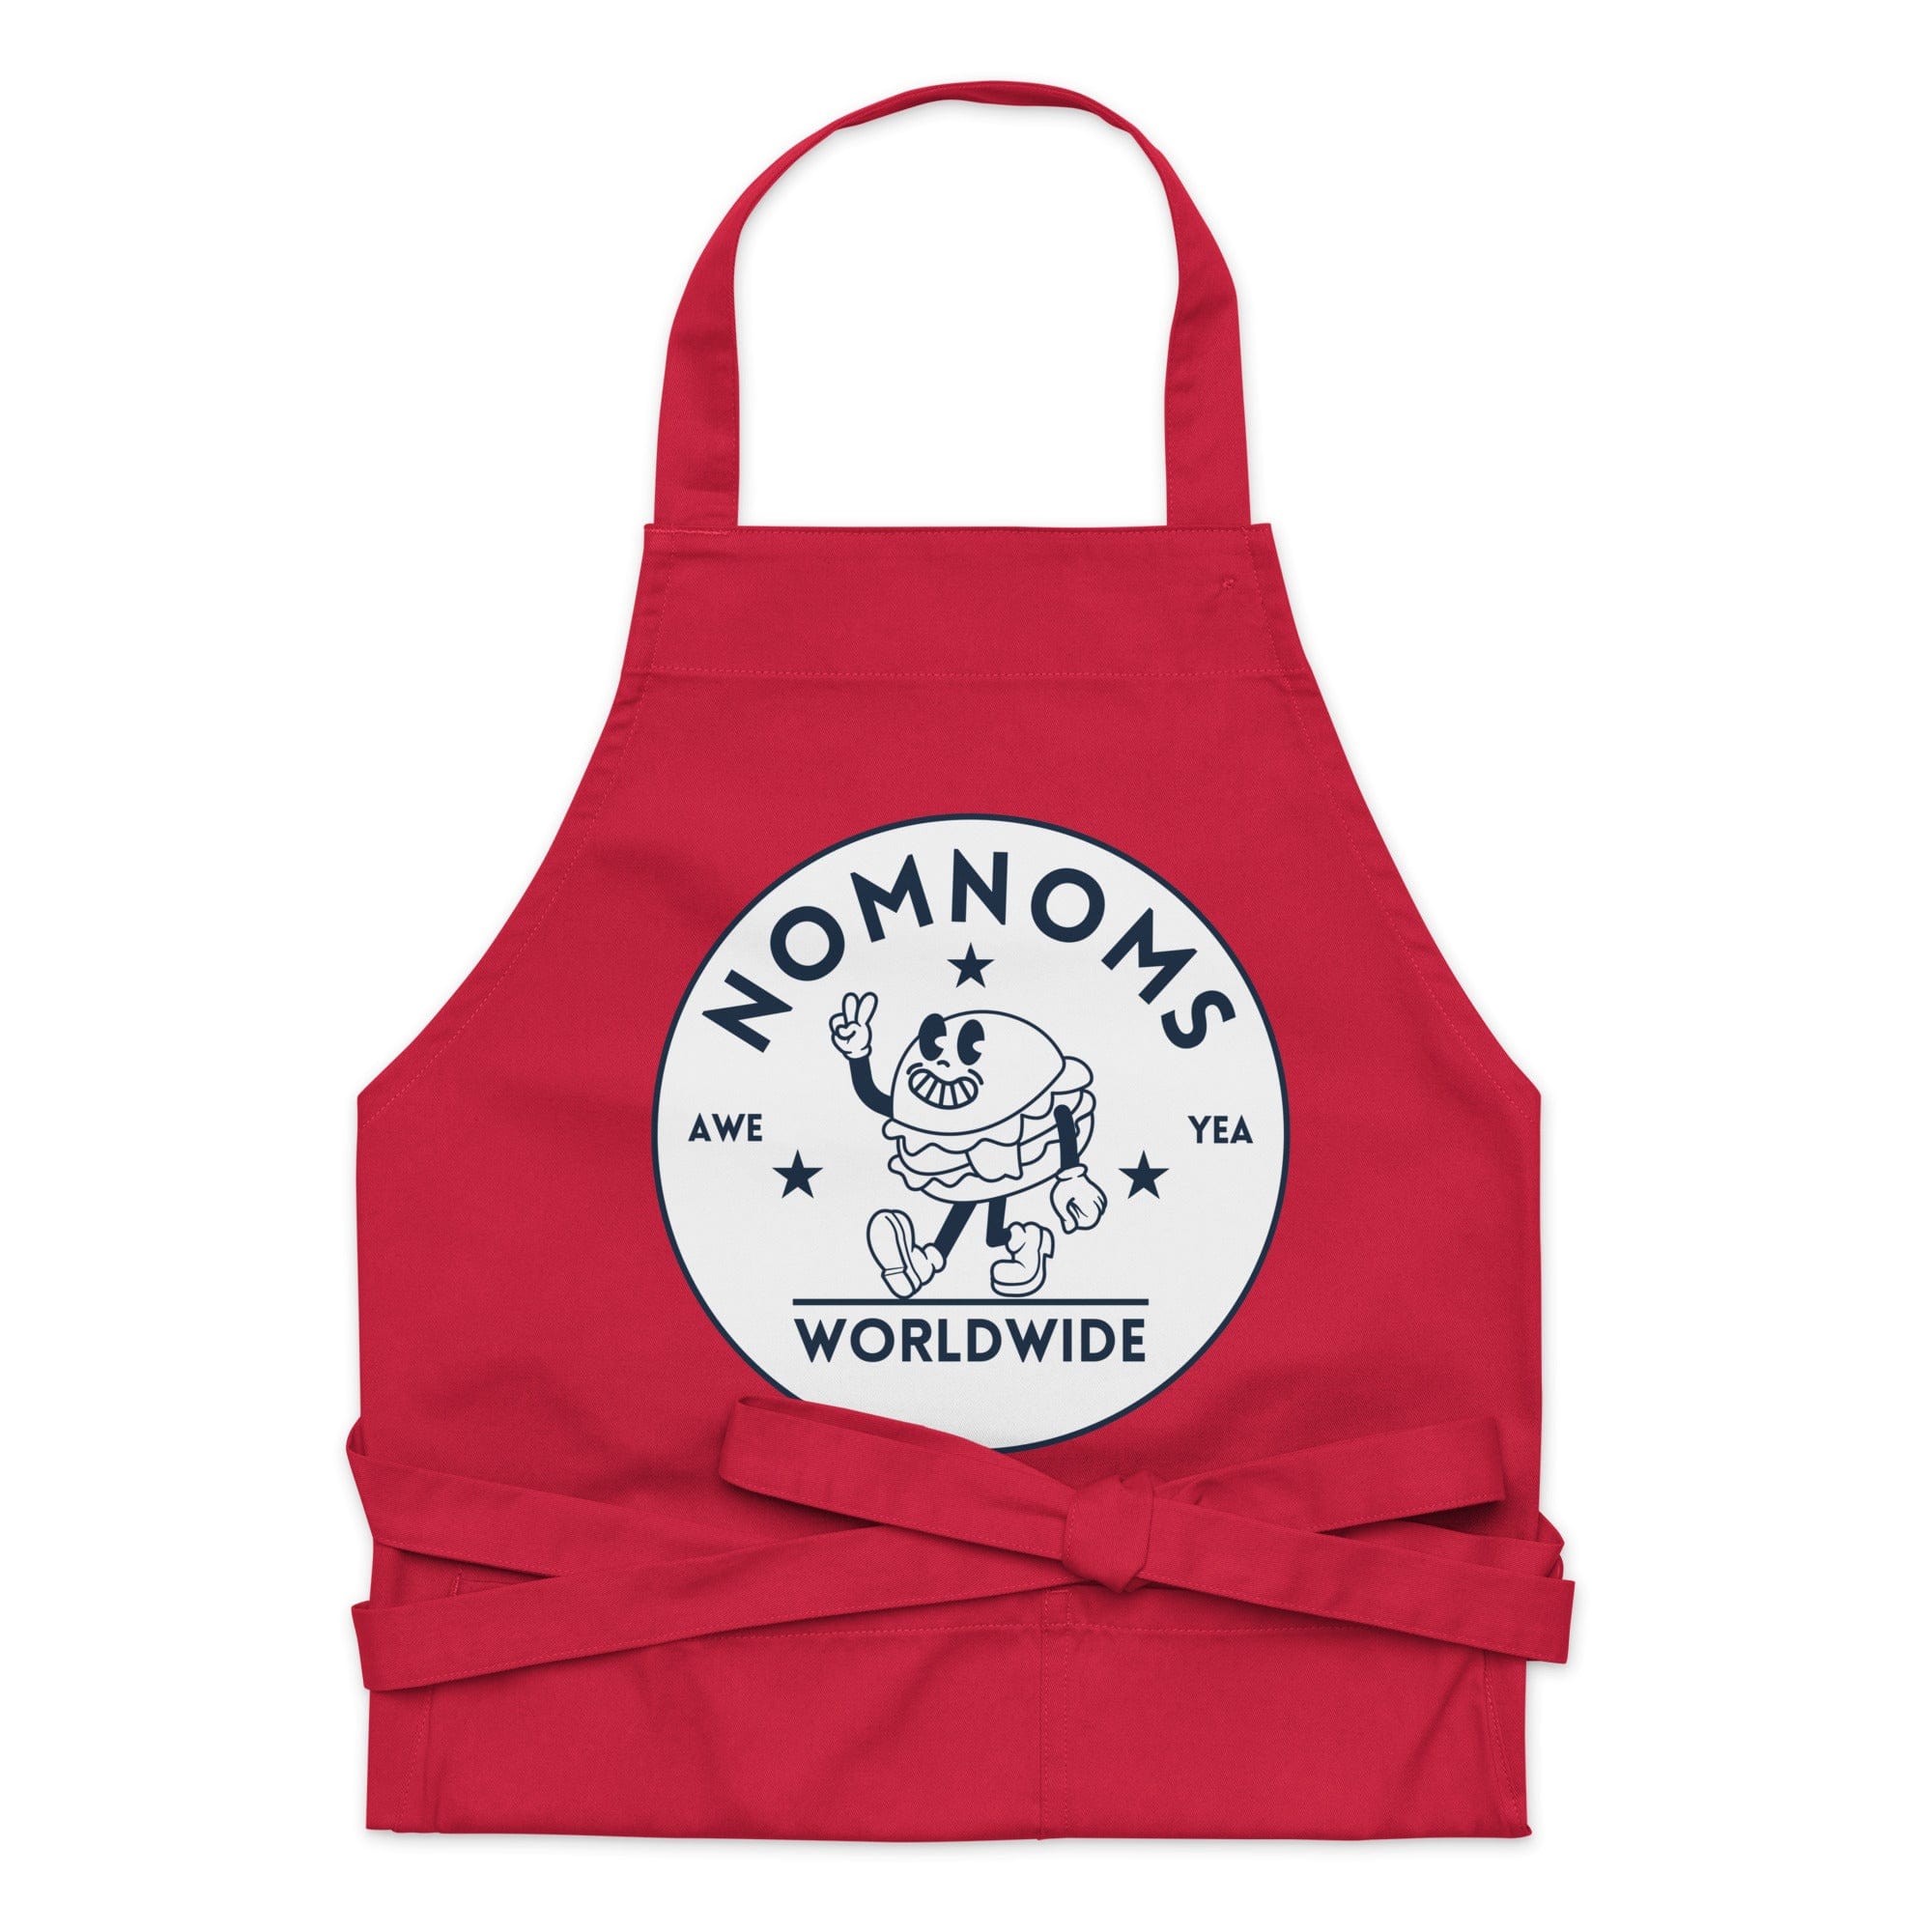 Nomnoms Worldwide Organic Cotton Apron Red Aprons Jolly & Goode